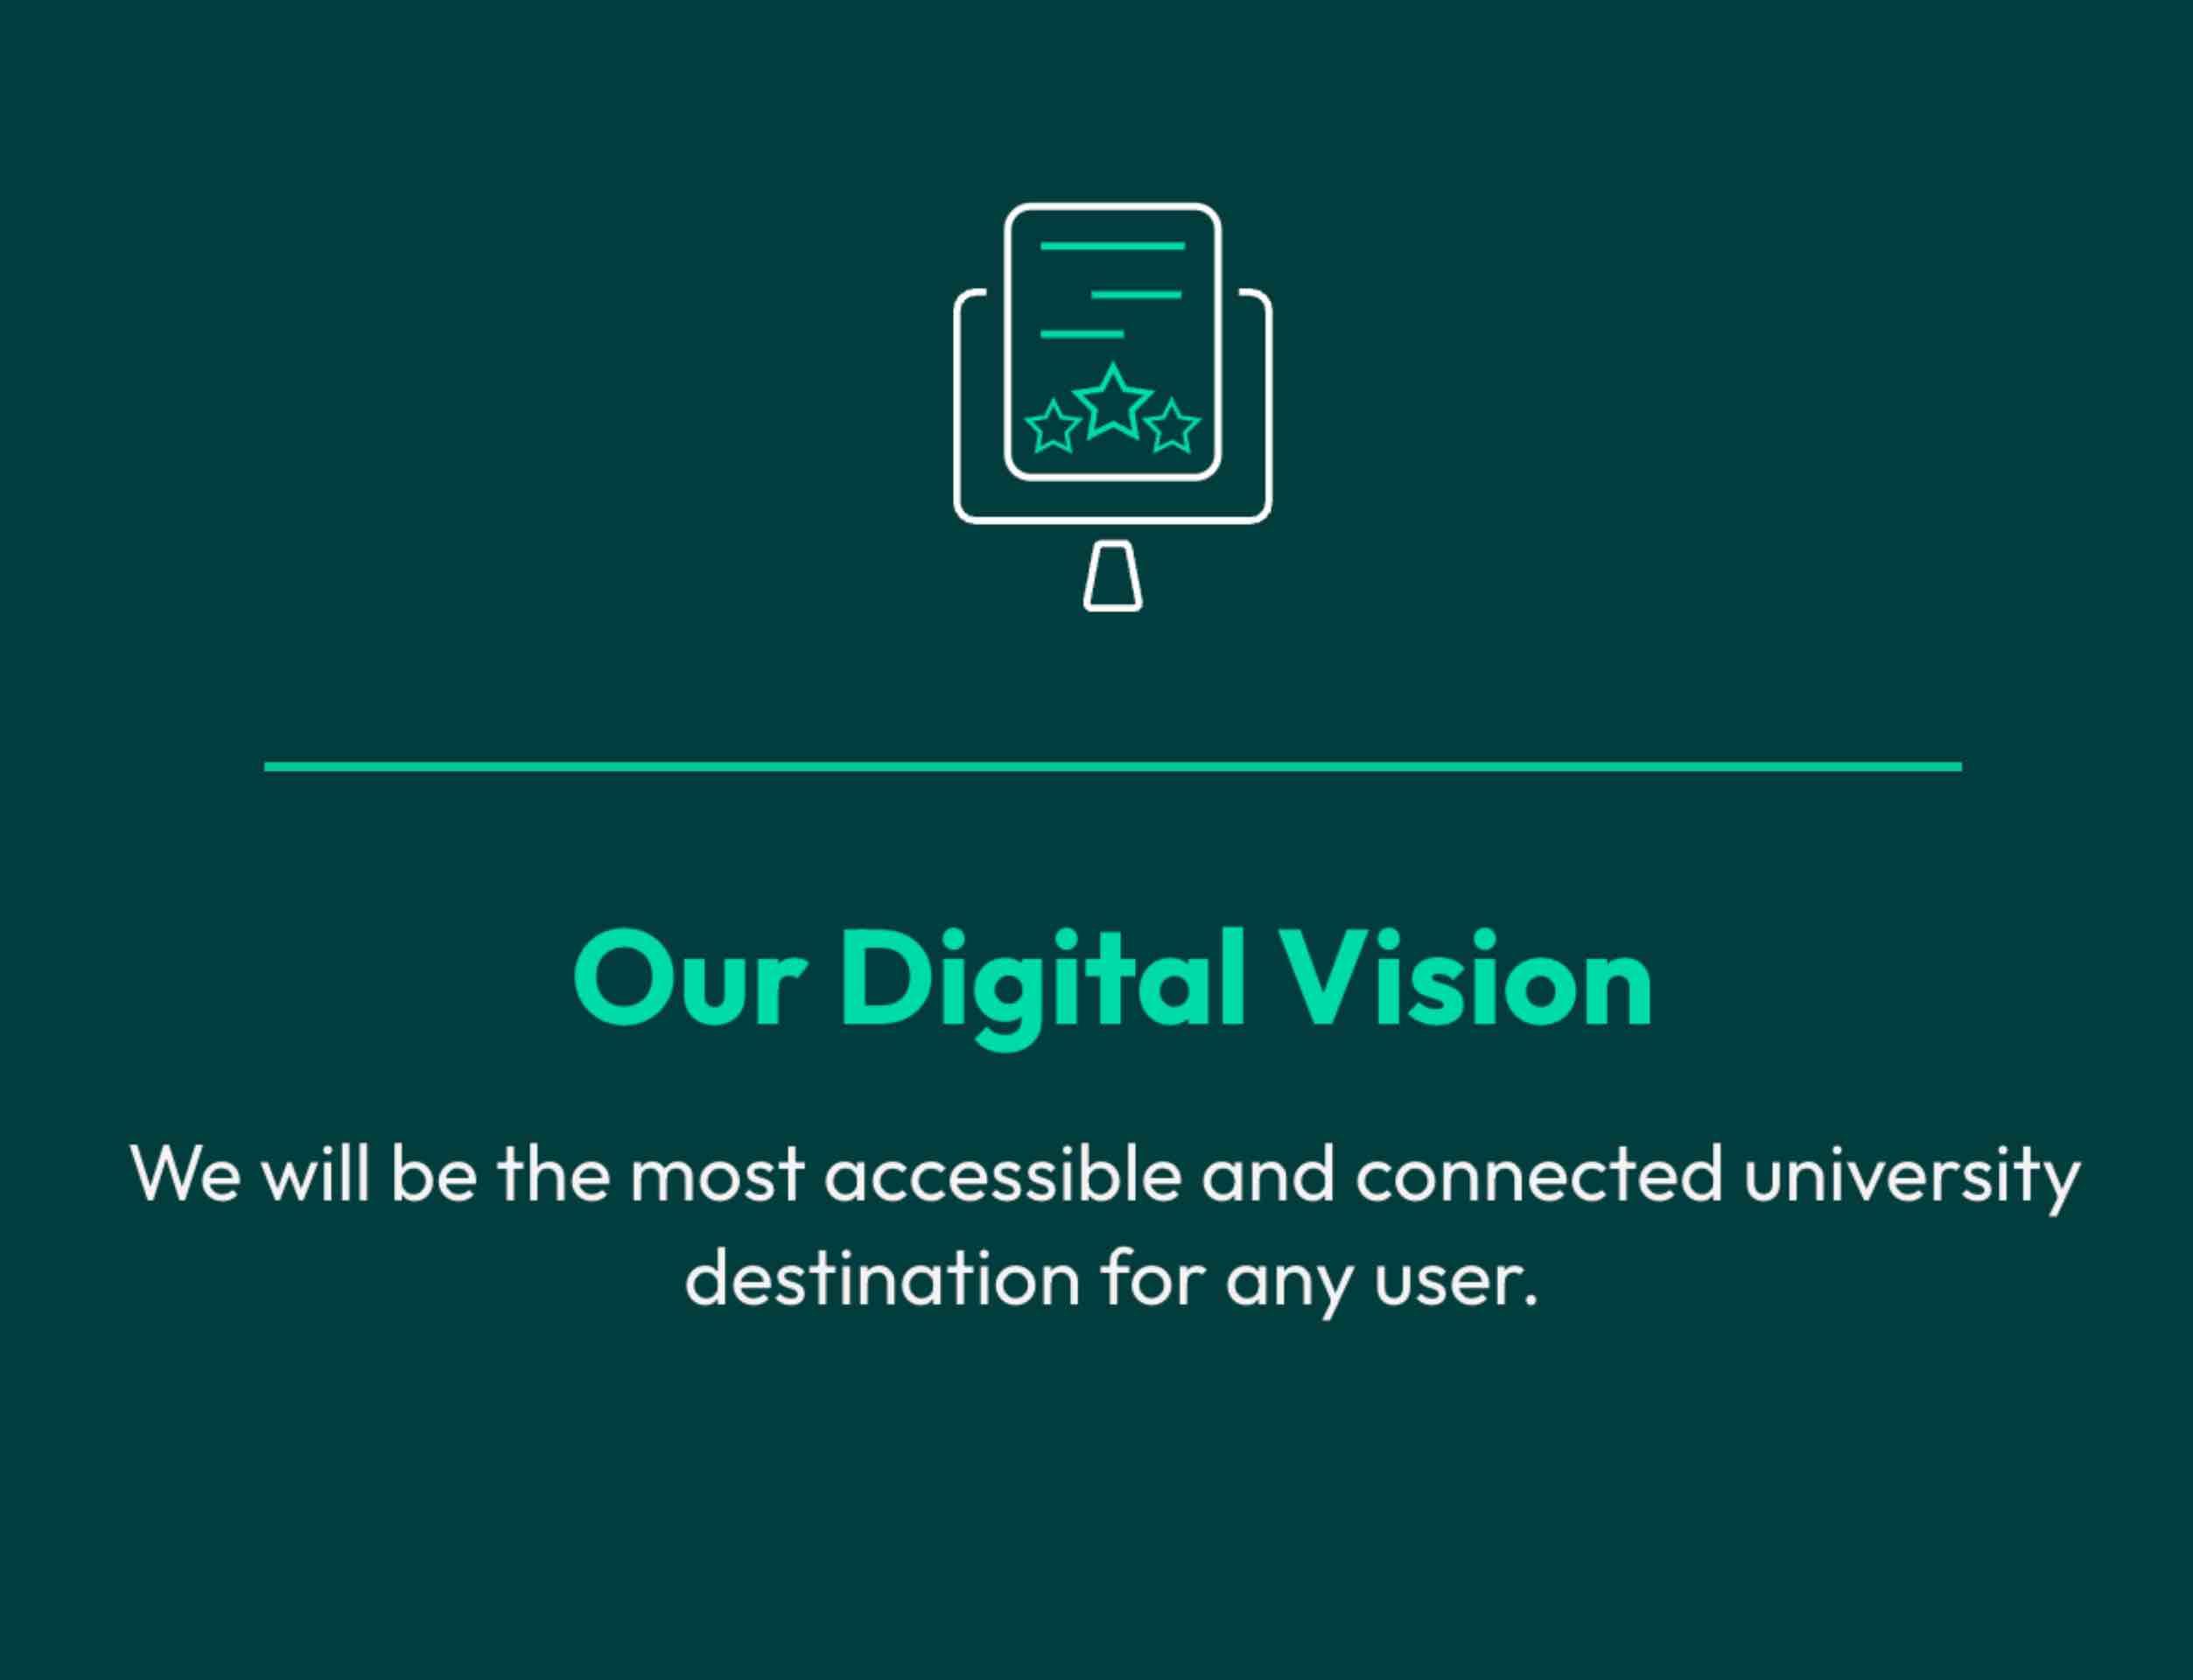 The University of Exeter’s Digital Strategy: Increasing Competitiveness